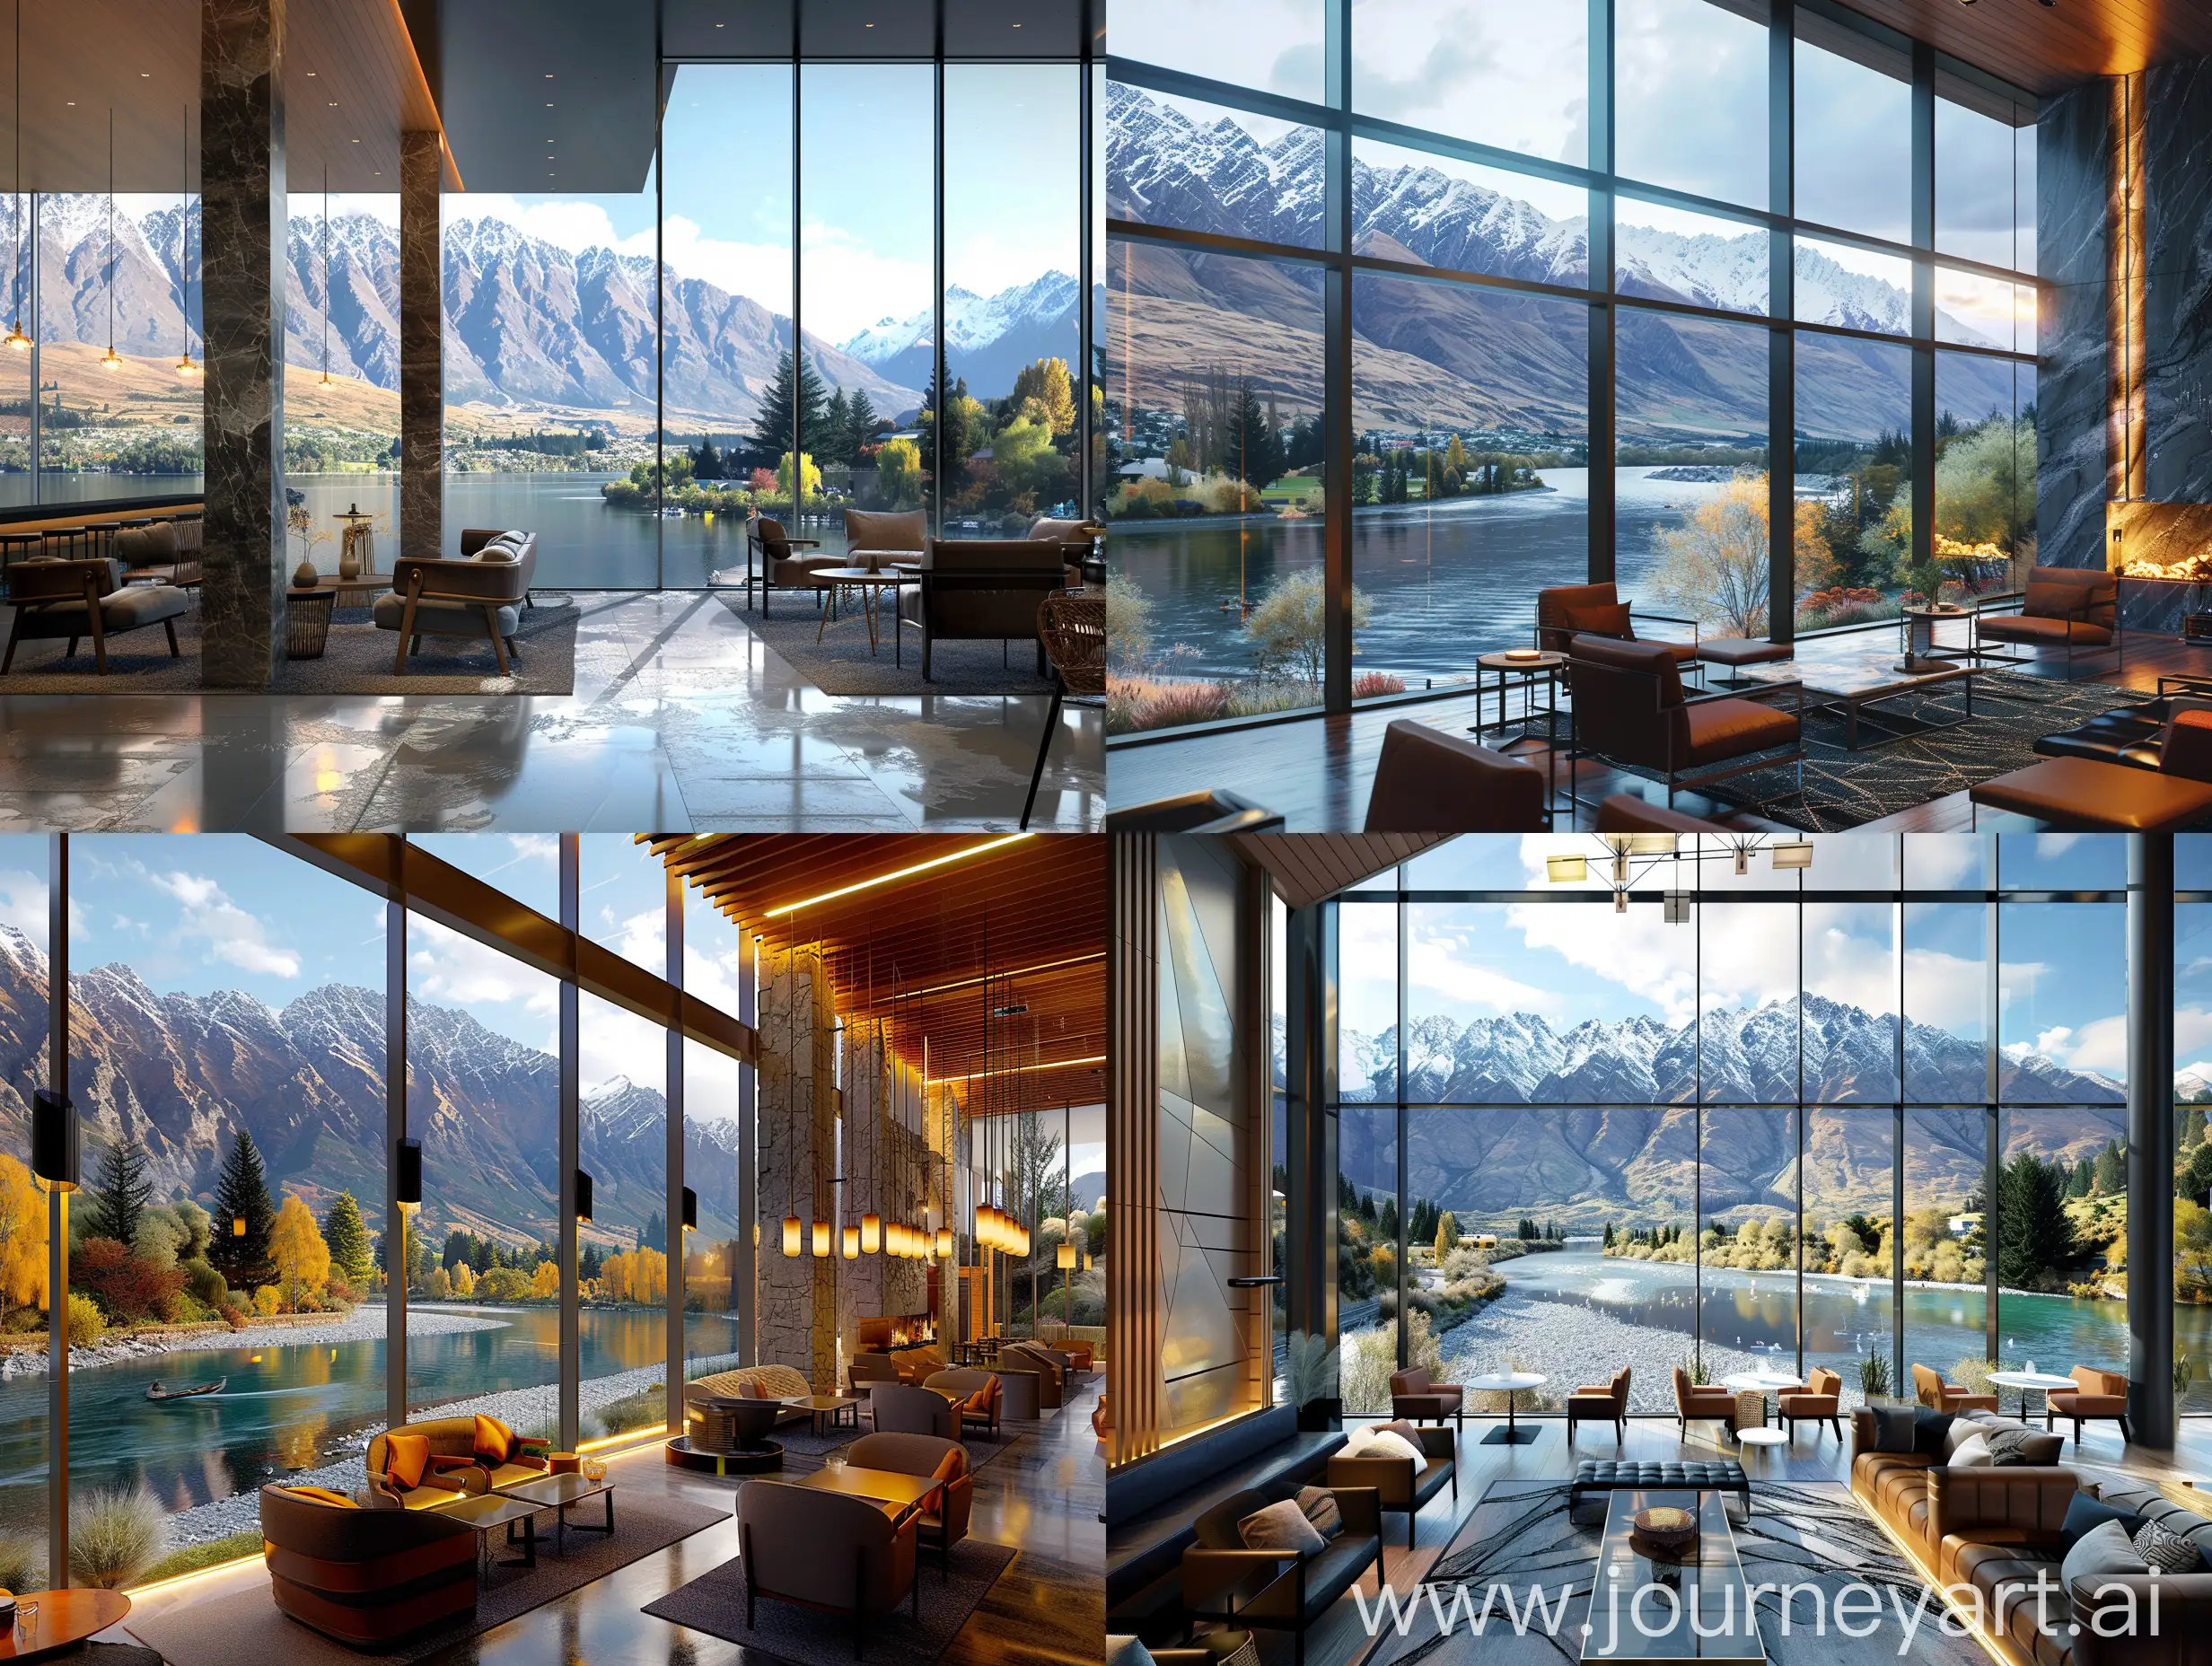 Hyperrealistic-Interior-of-a-Modern-Hotel-in-Queenstown-New-Zealand-with-River-and-Mountain-View